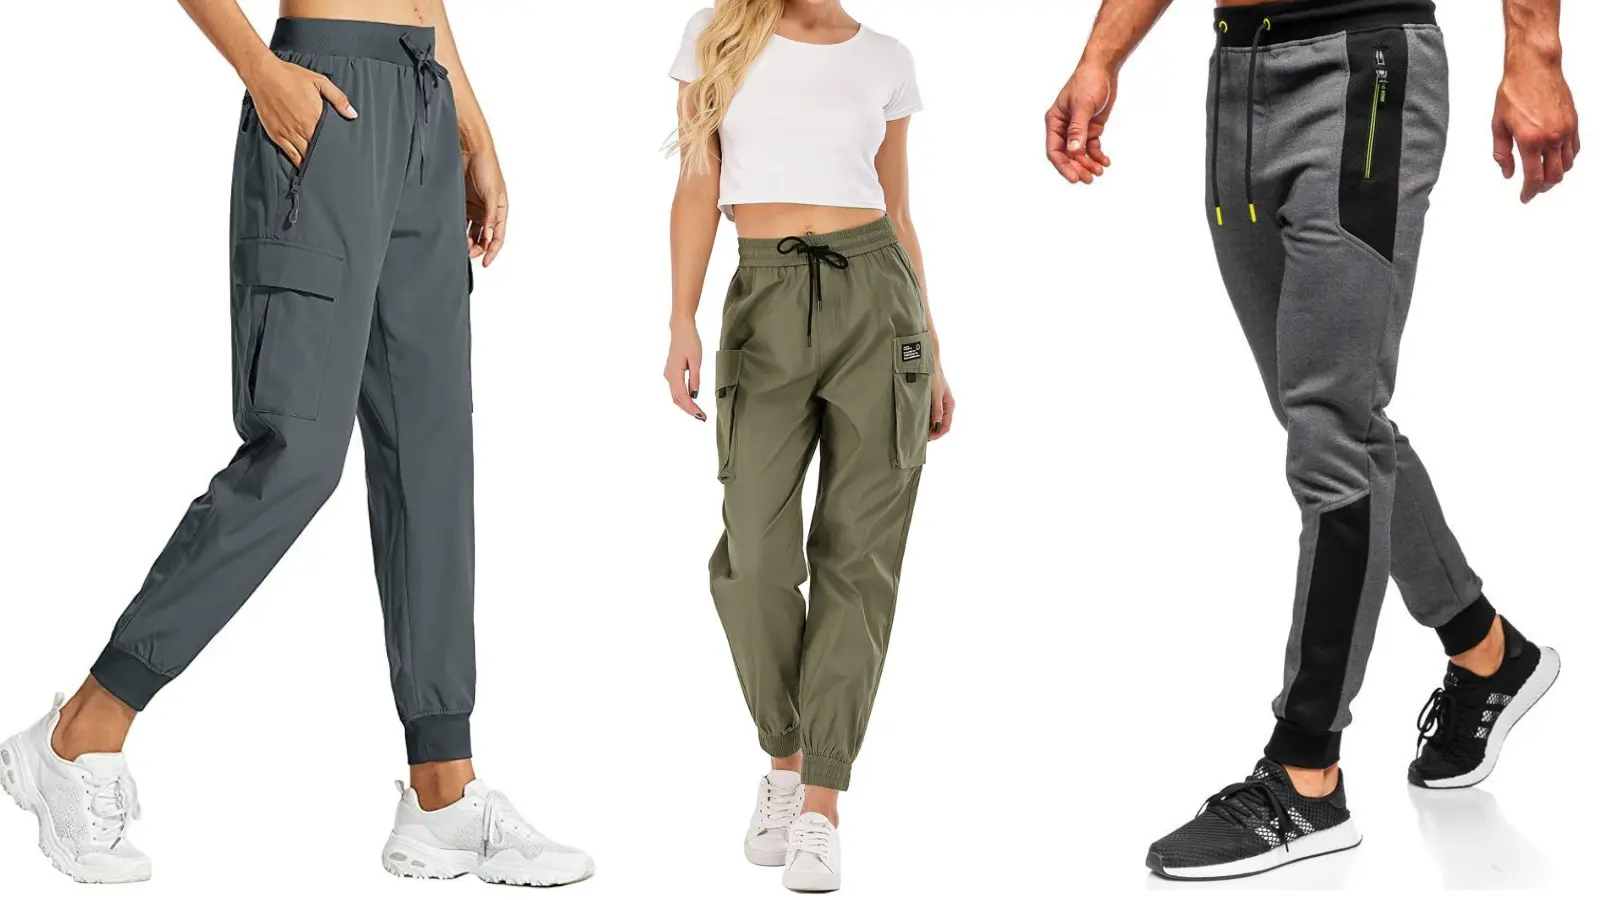 How To Choose Workout Pants